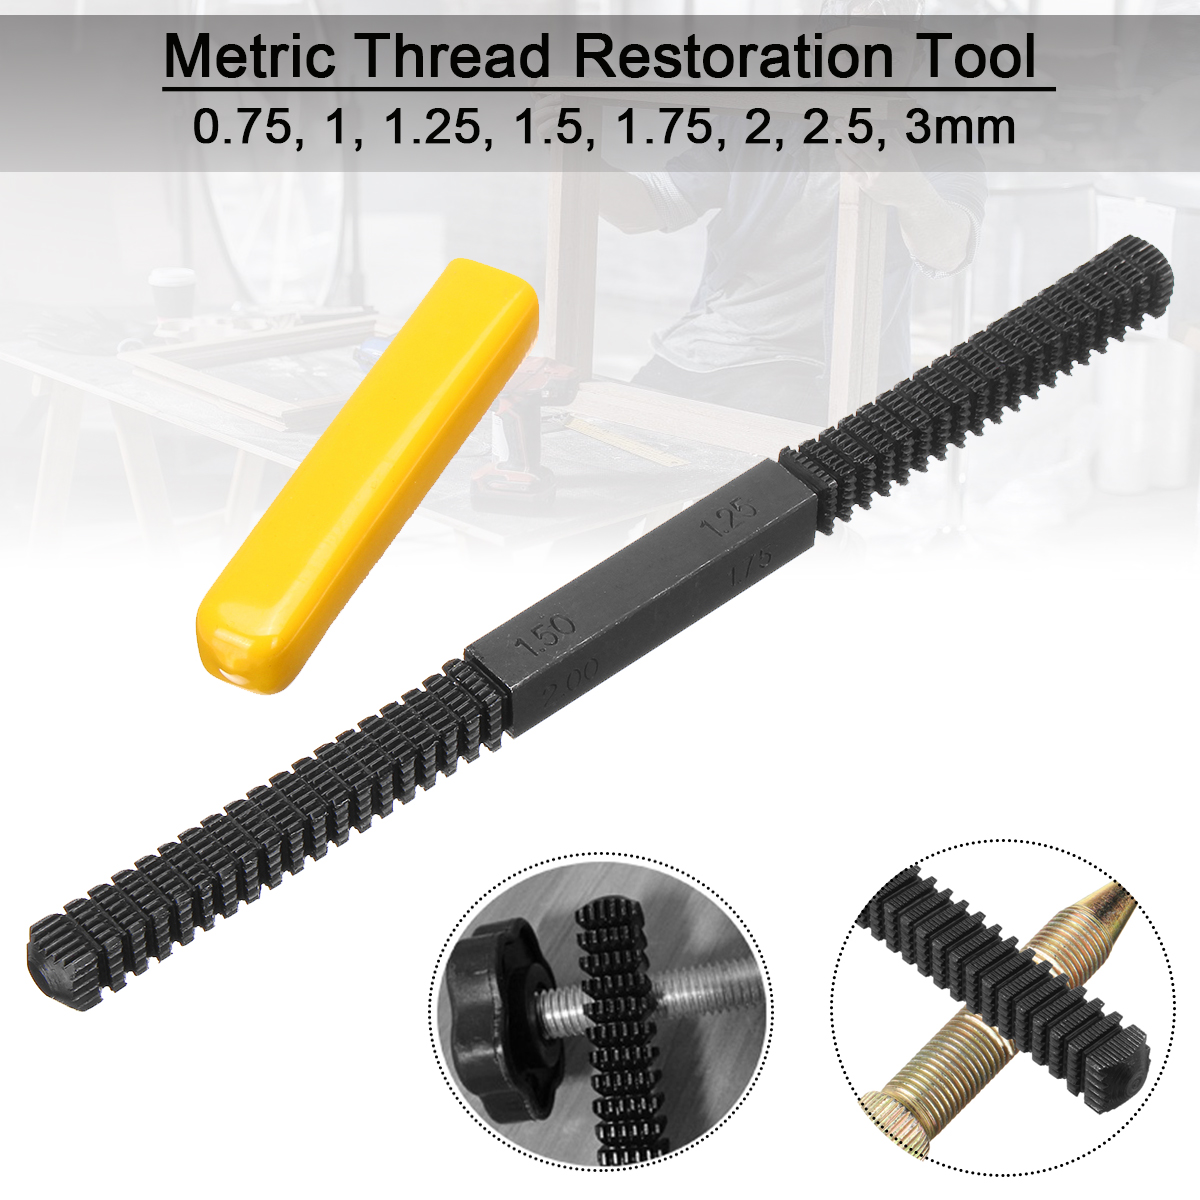 Metric-Thread-Repair-Tool-Restoration-File-Damaged-Threads-075-to-3mm-Pitch-1424557-2